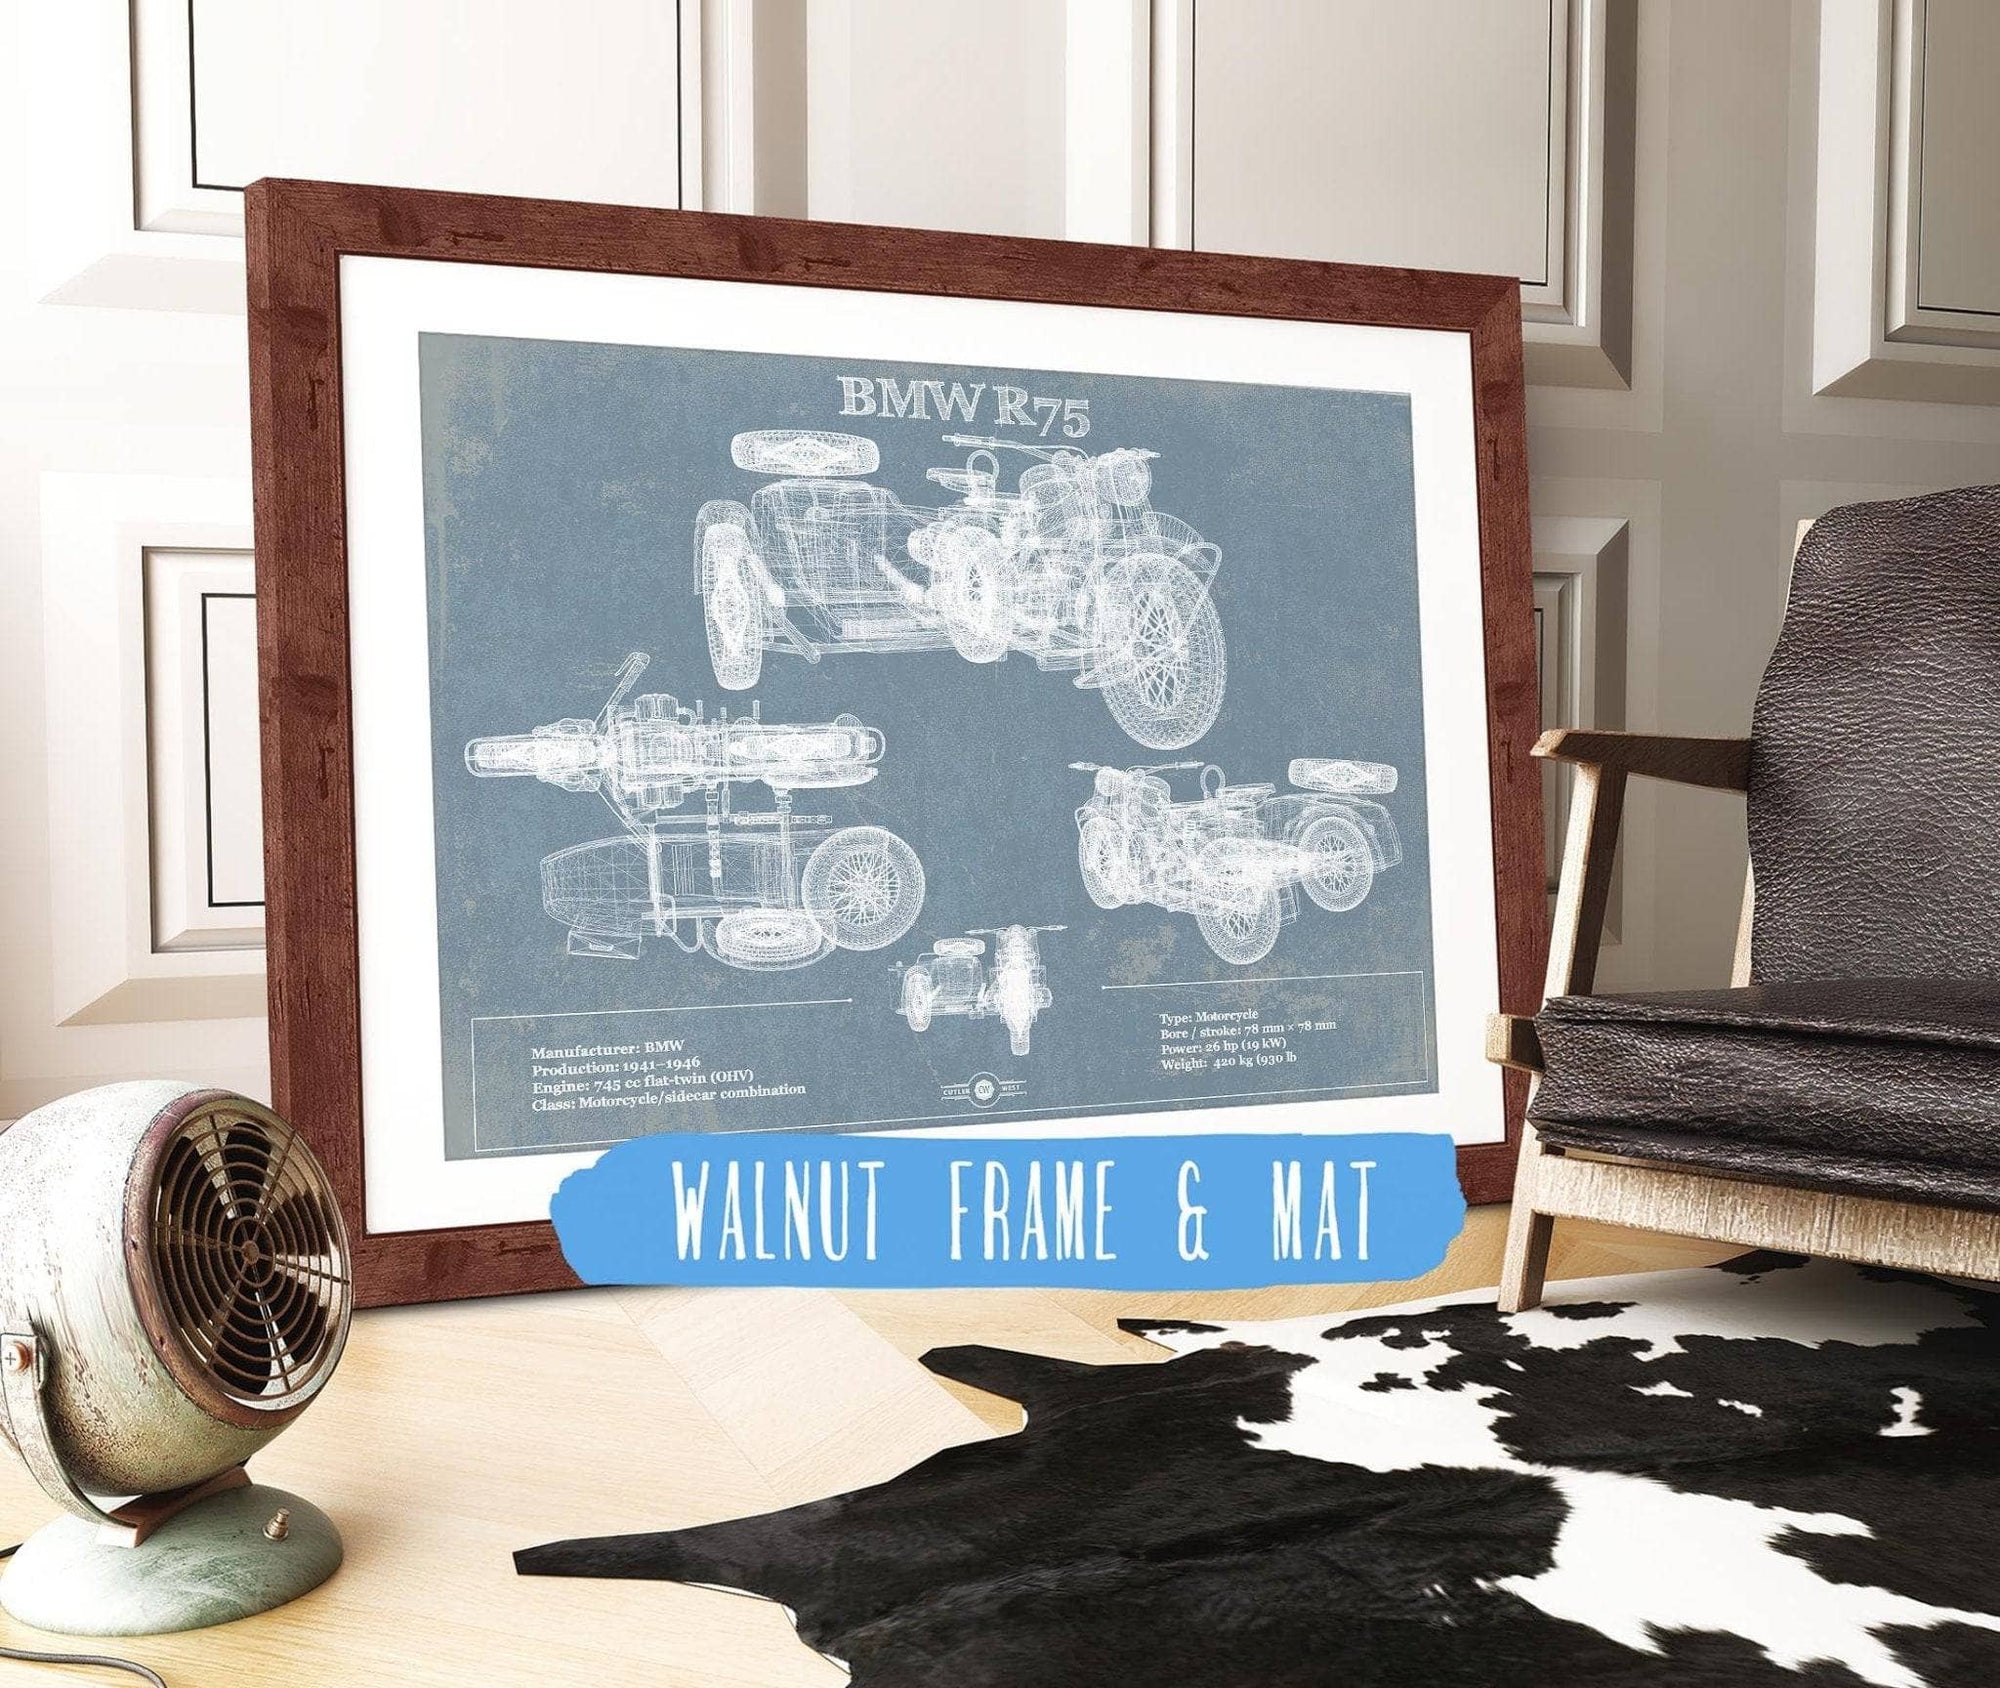 Cutler West Vehicle Collection 14" x 11" / Walnut Frame & Mat BMW R75 Blueprint Motorcycle Patent Print 833110058_47487